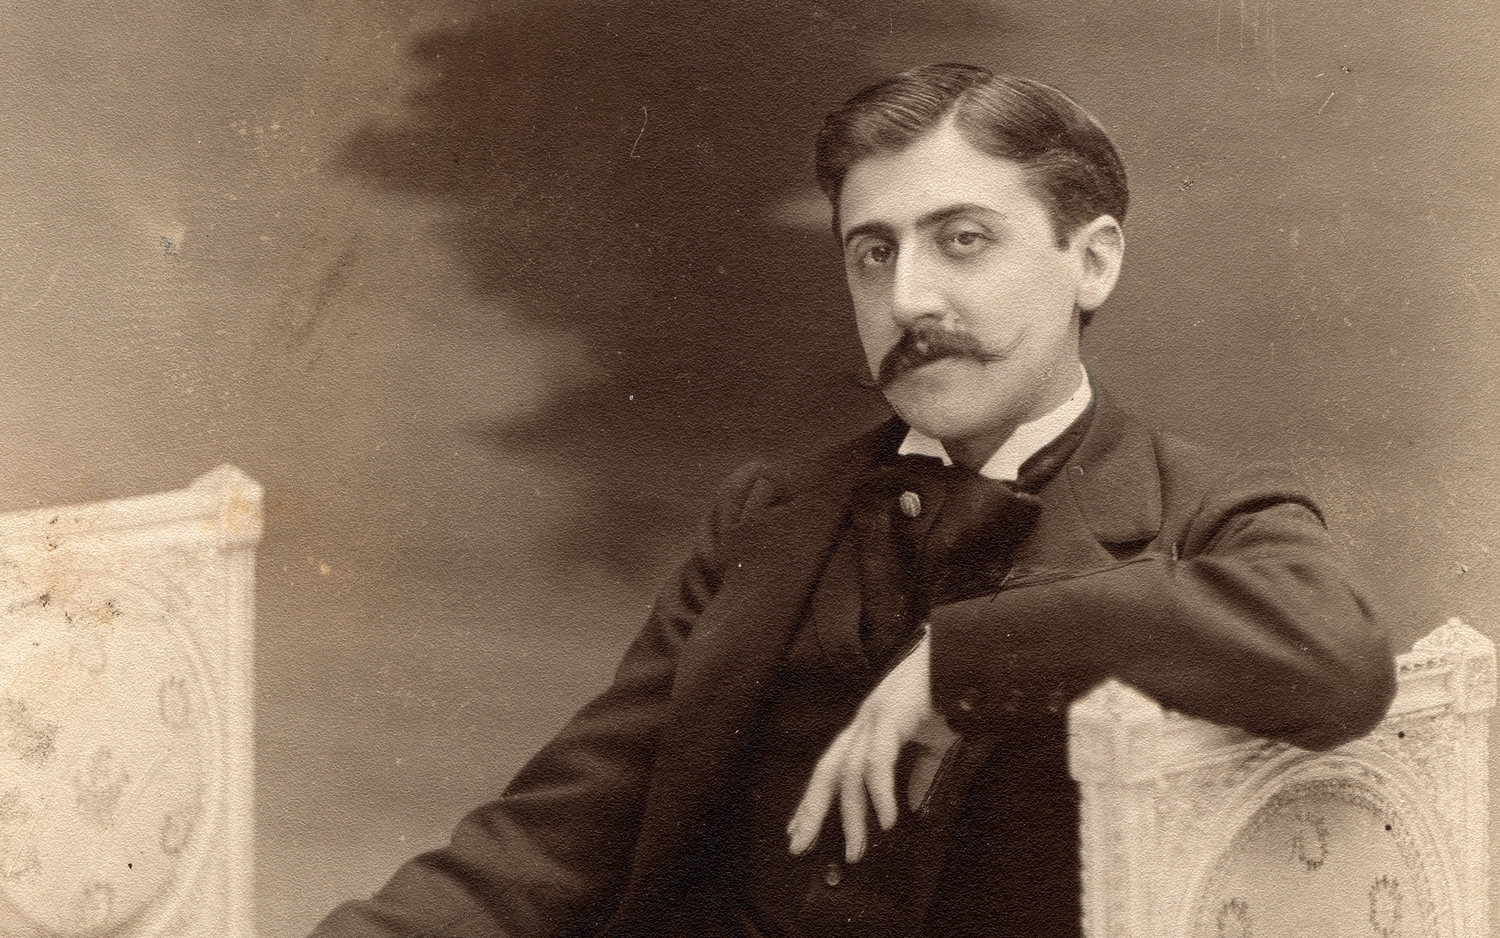 Proust in person